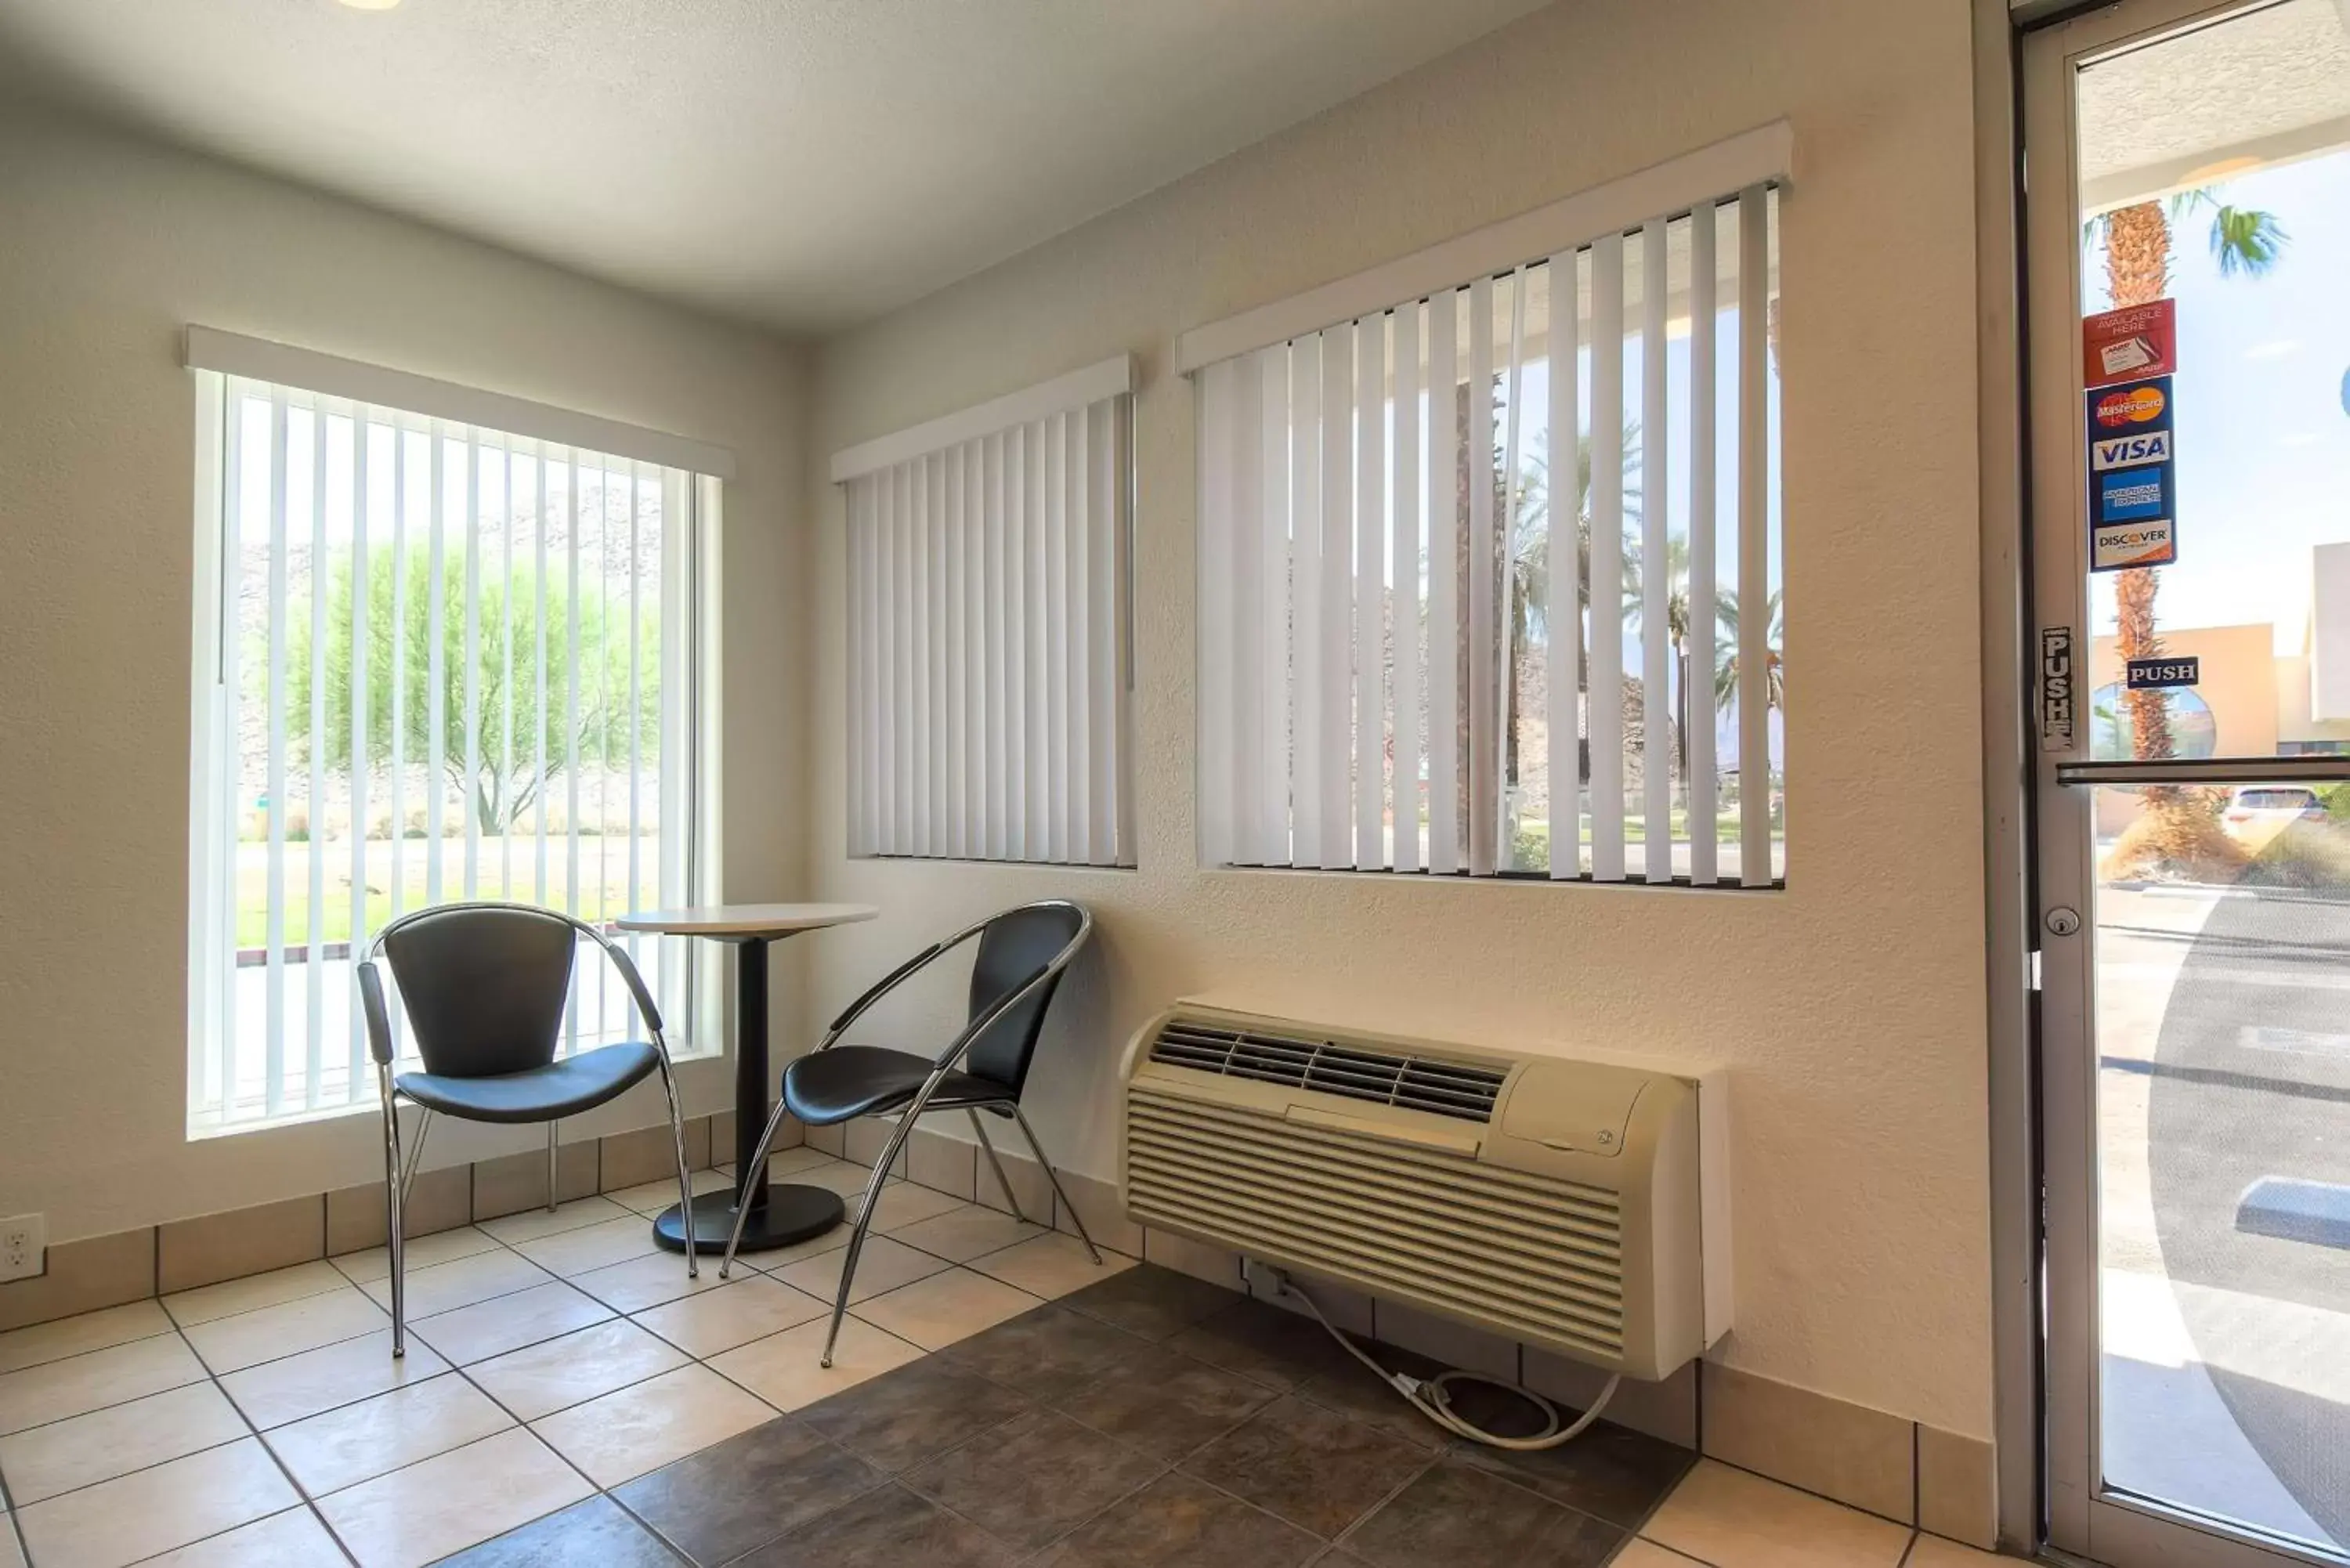 Lobby or reception in Motel 6-Rancho Mirage, CA - Palm Springs